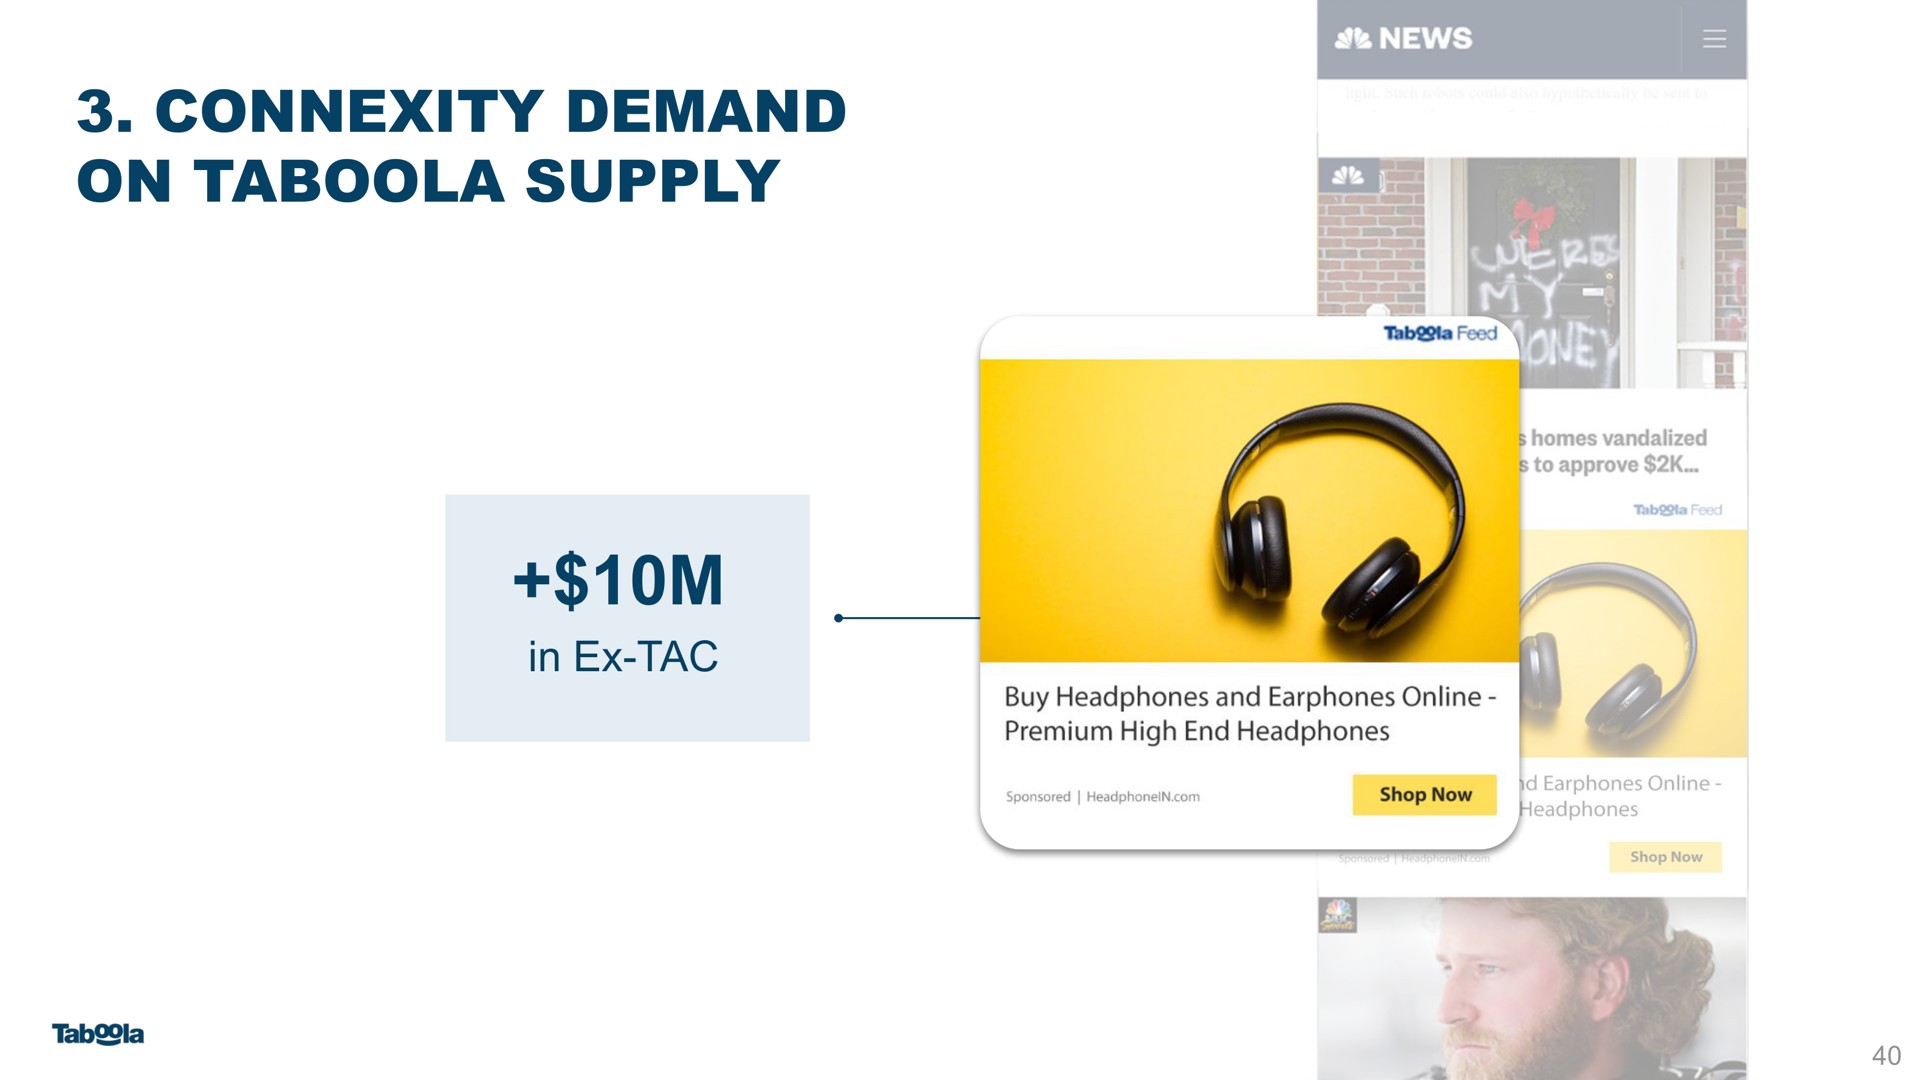 connexity demand on supply in i | Taboola